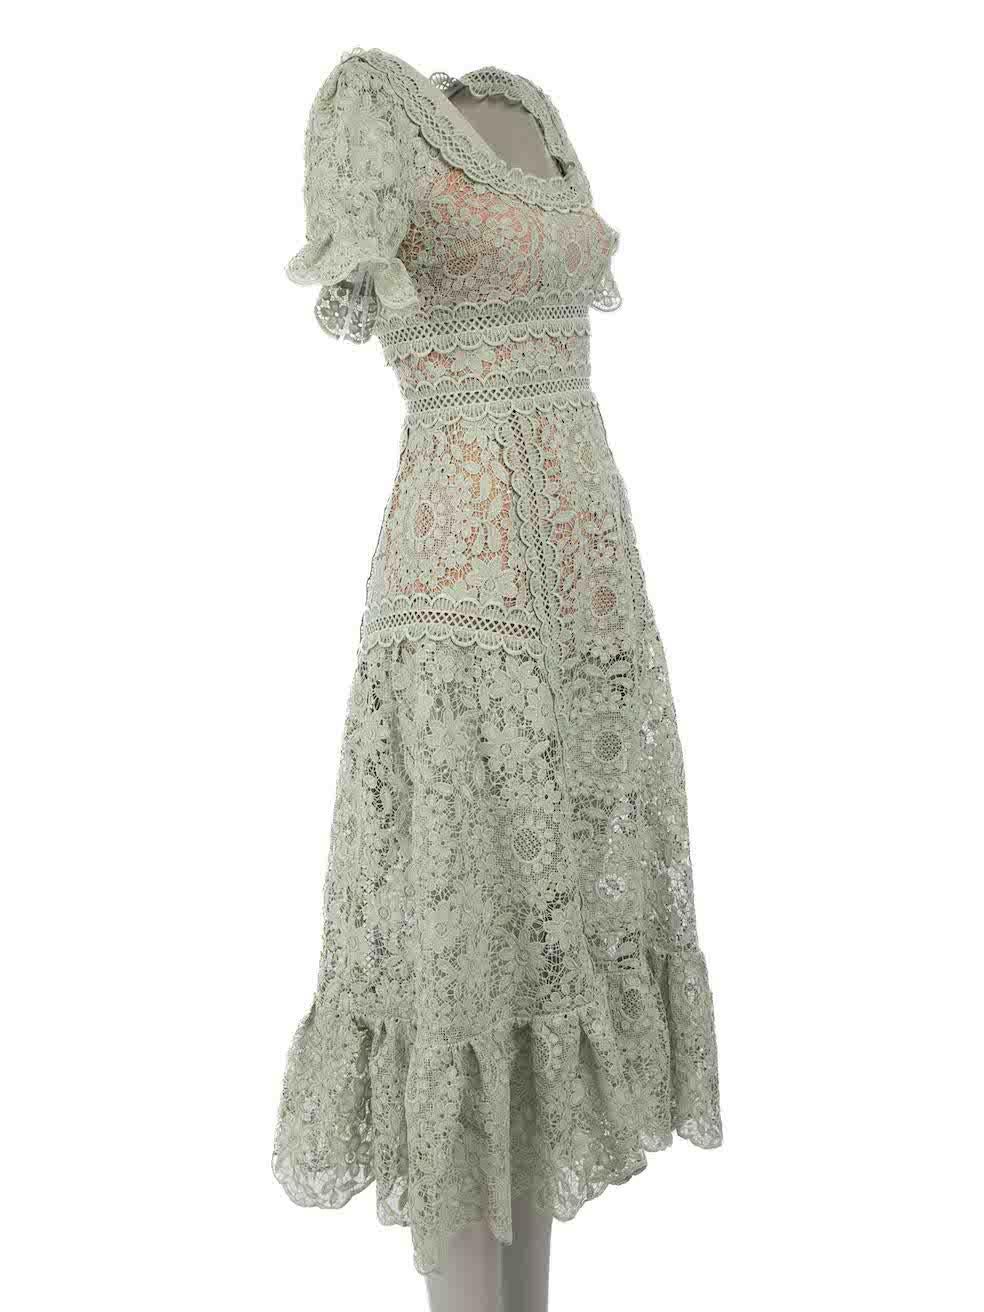 CONDITION is Never worn, with tags. No visible wear to dress is evident on this new Self-Portrait designer resale item.

Details
Guipure
Green
Polyester lace
Dress
Short sleeves
Round neck
Floral pattern
Midi
Back zip and hook fastening
 
Made in